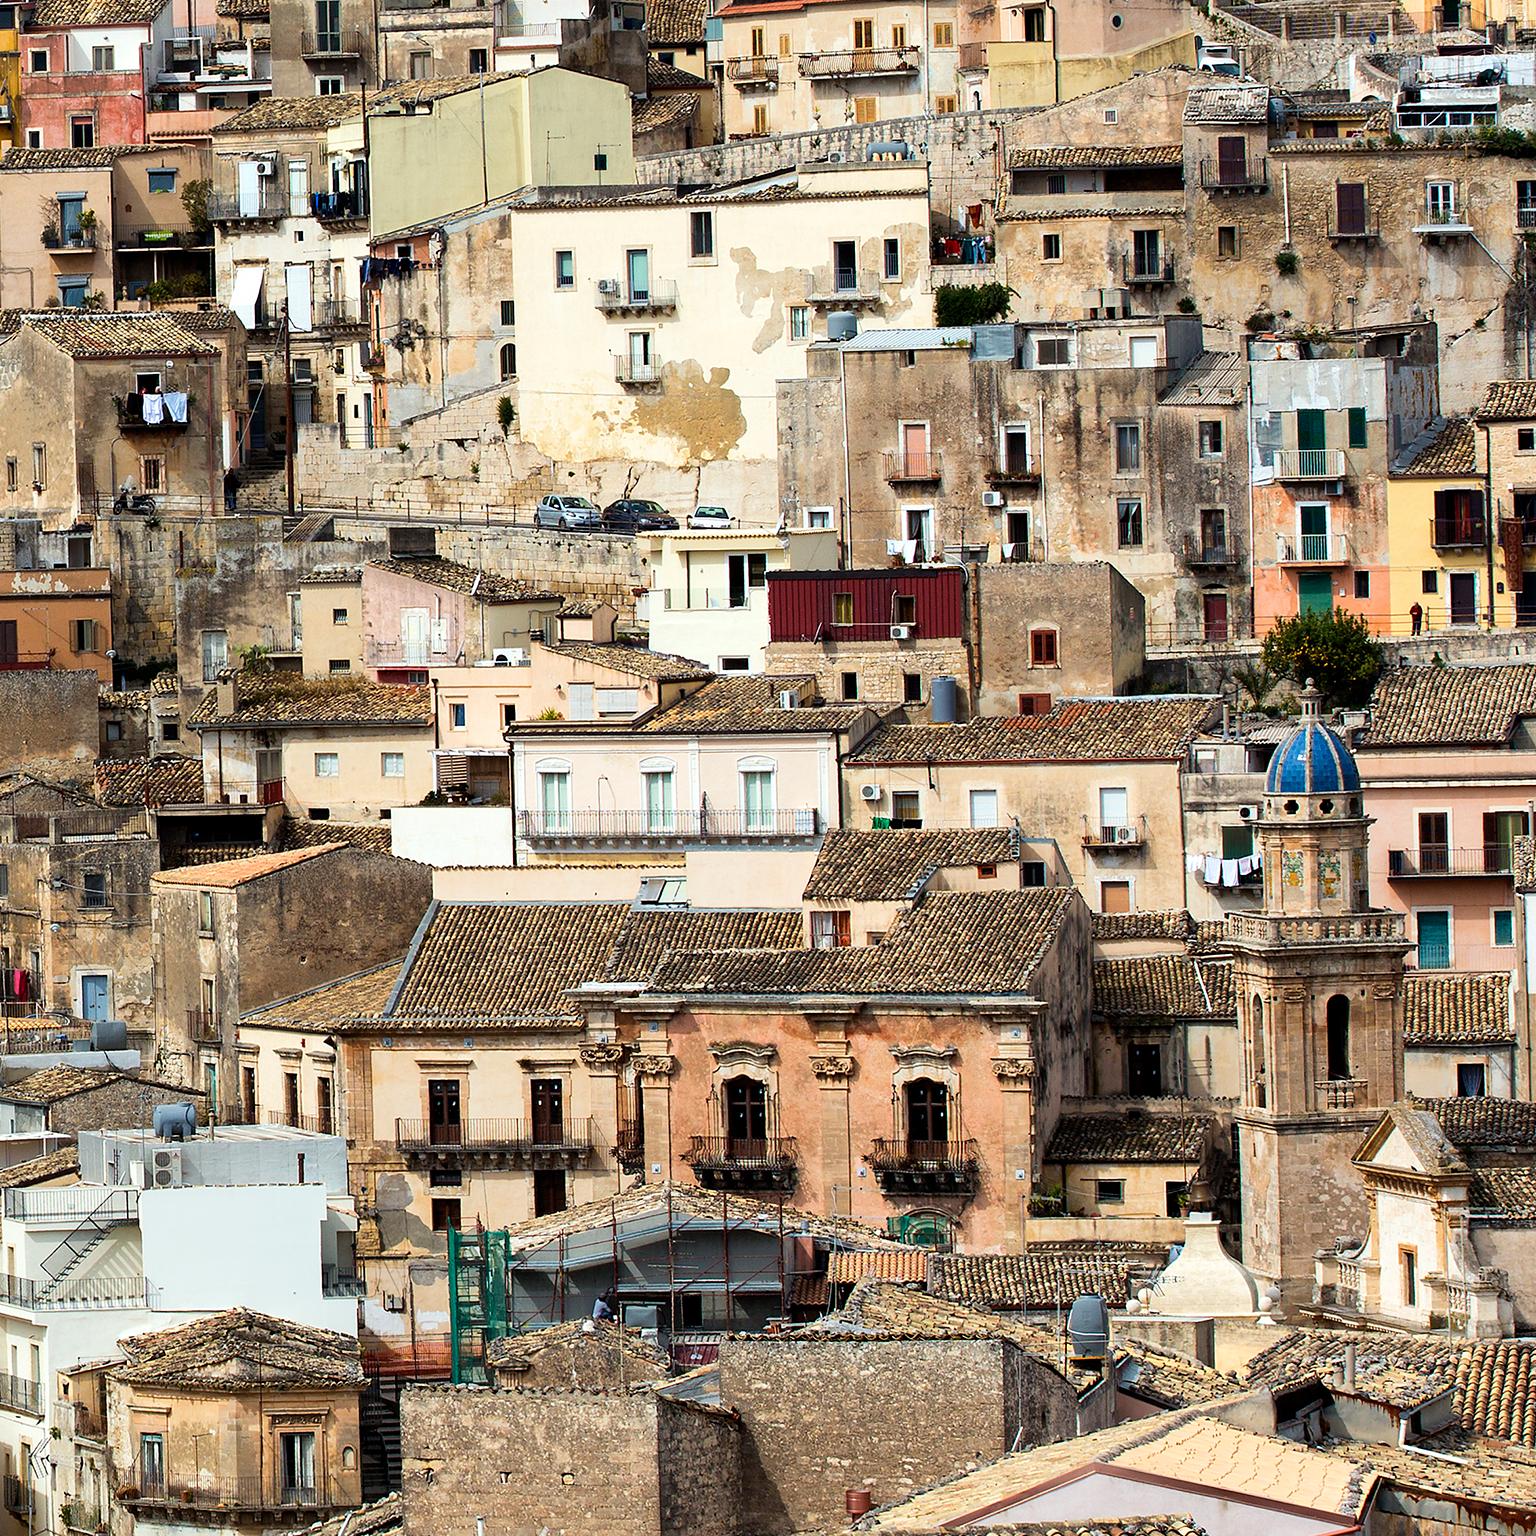 Italy, Sicily, View of the town of Ragusa, 2017 - Photograph by  Cosmo Condina